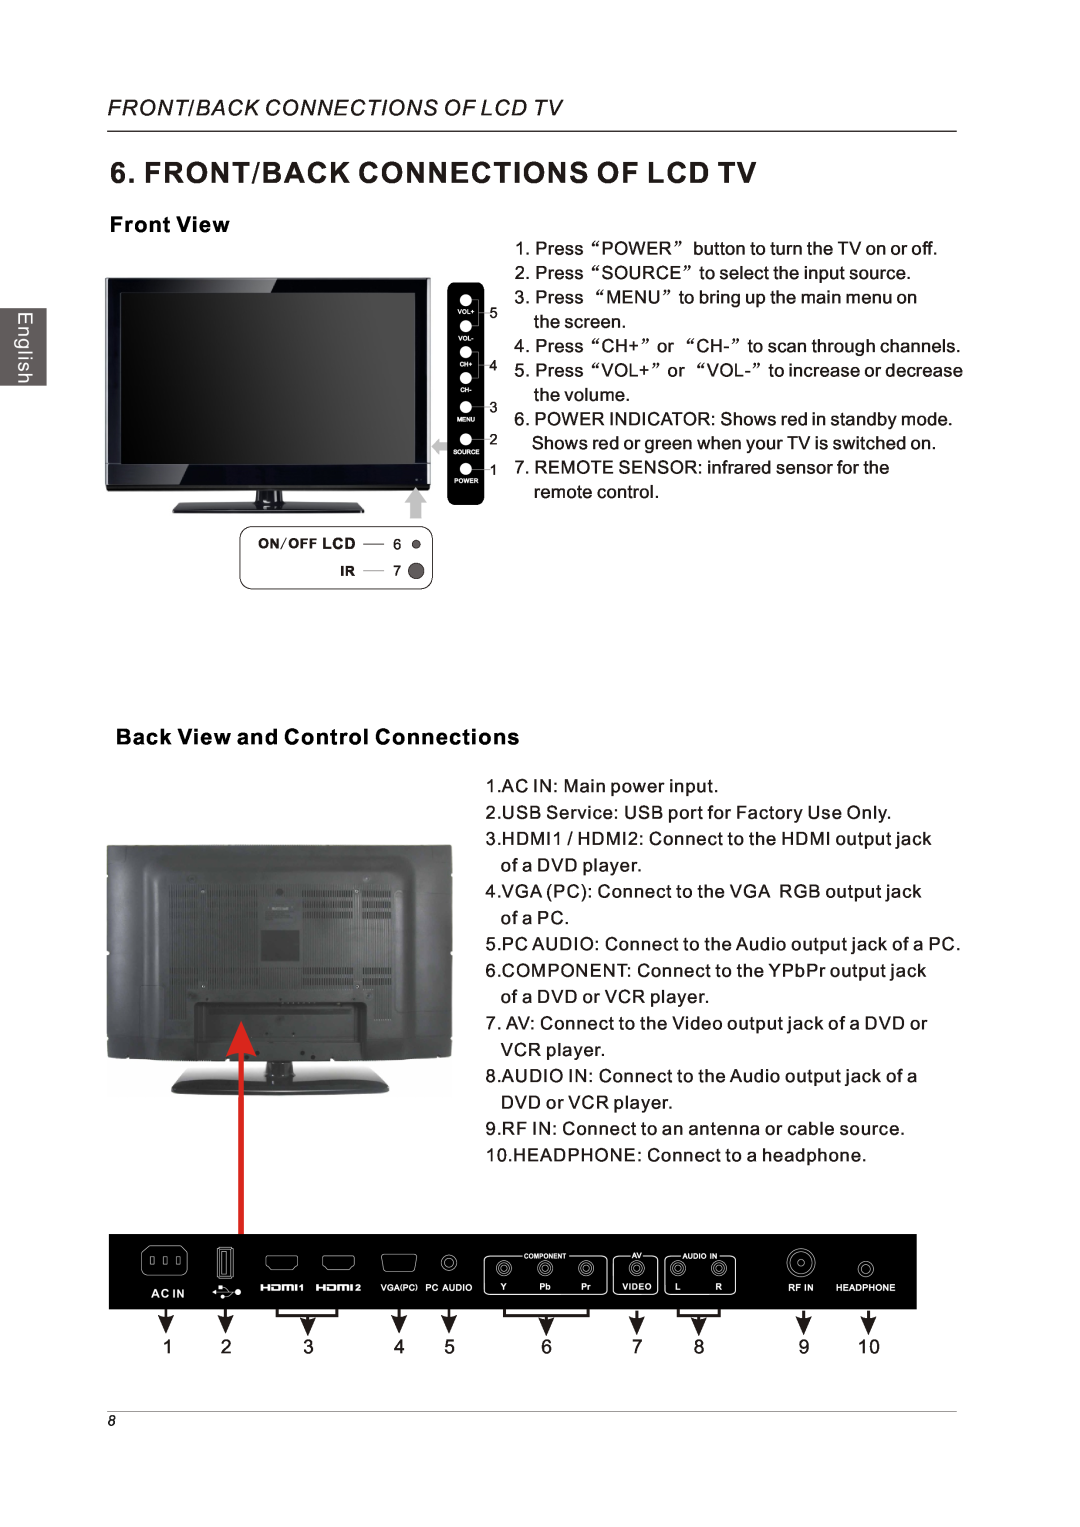 Westinghouse VR-3225 manual Front/Back Connections Of Lcd Tv, Front View, Back View and Control Connections, English 